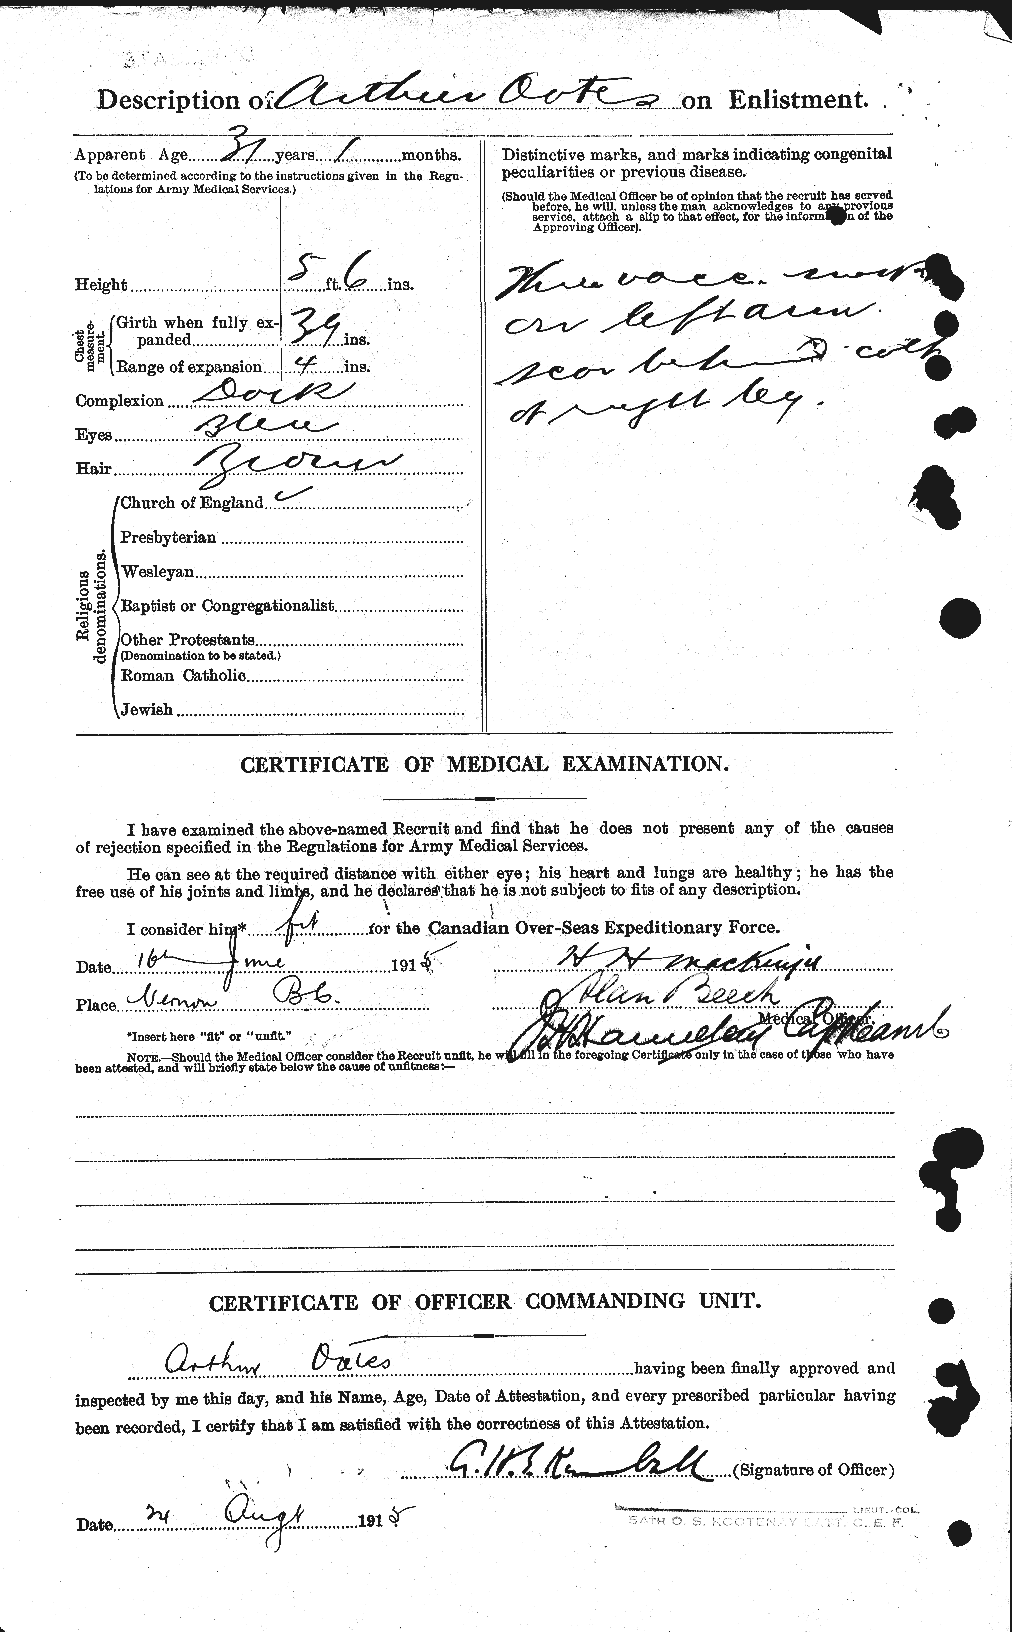 Personnel Records of the First World War - CEF 552534b